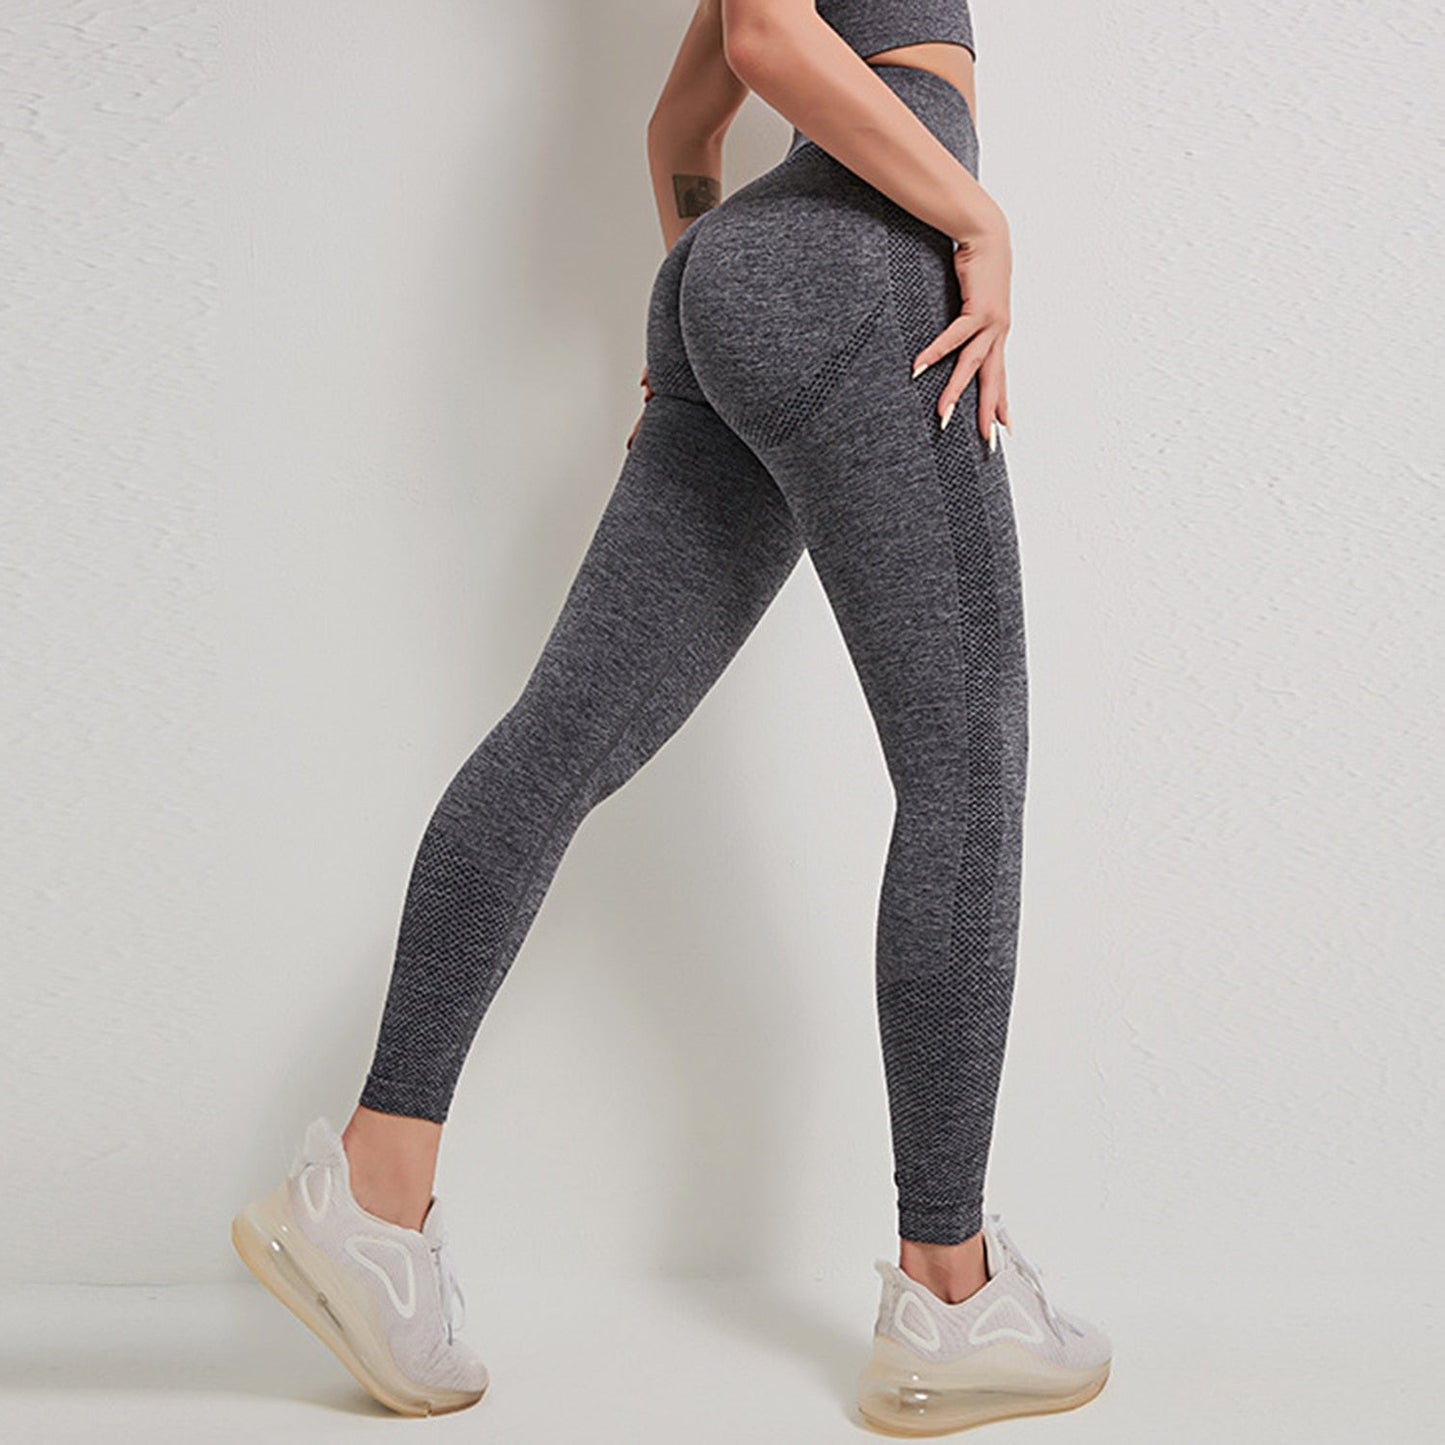 WILKYsYoga & Pilates LeggingsFitness Running Yoga Pants Pilates LeggingsLadies, enhance your workout experience with our new Fitness Running Yoga Pants! Constructed from high-grade spandex and nylon, this Energy Elastic Trousers are desi